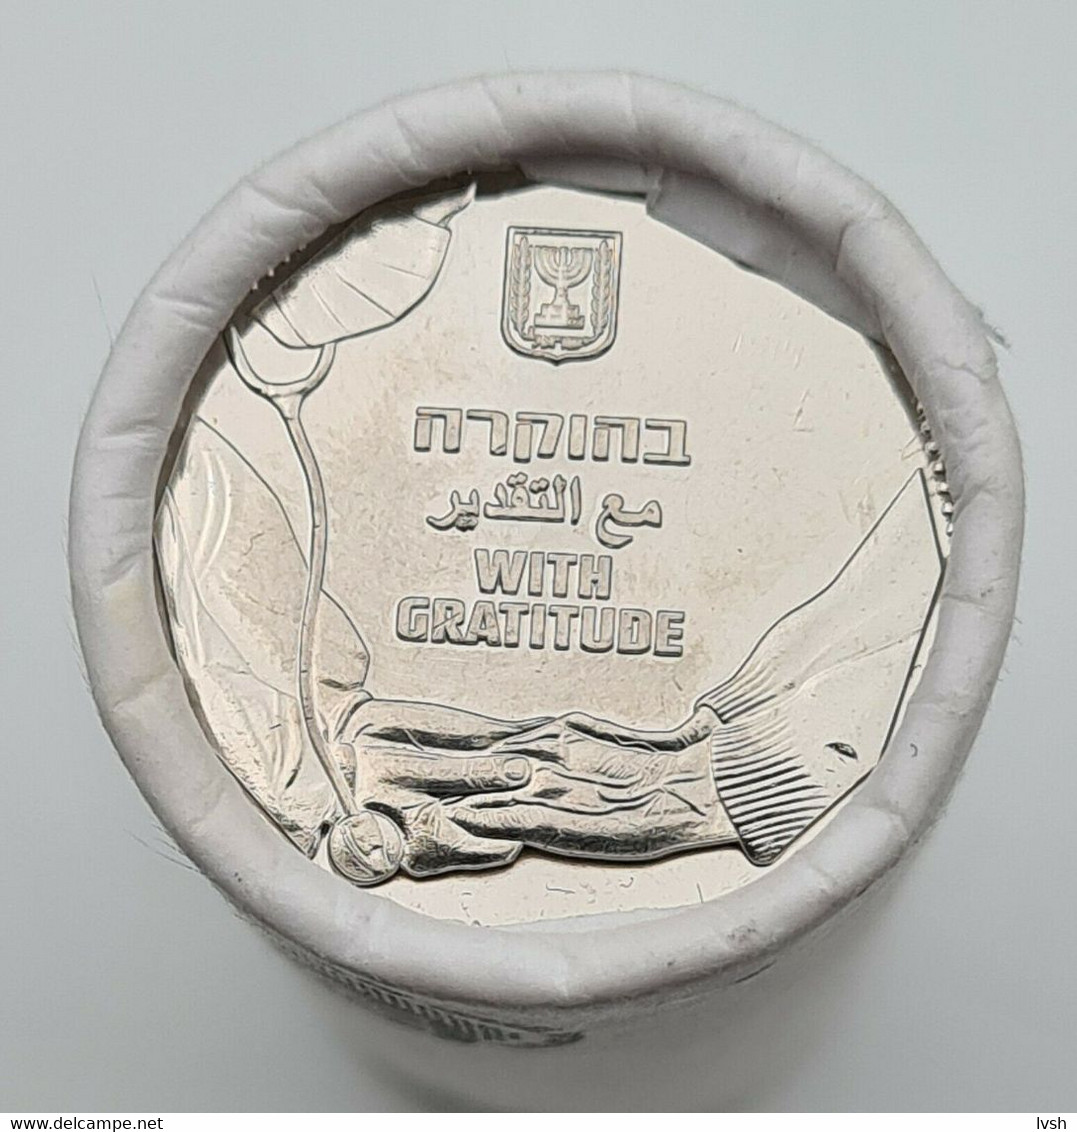 Israel.5 New Sheqalim 2021.Coin Of Appreciation For Medical Staff(Covid-19).UNC (From Rool). - Autres – Asie